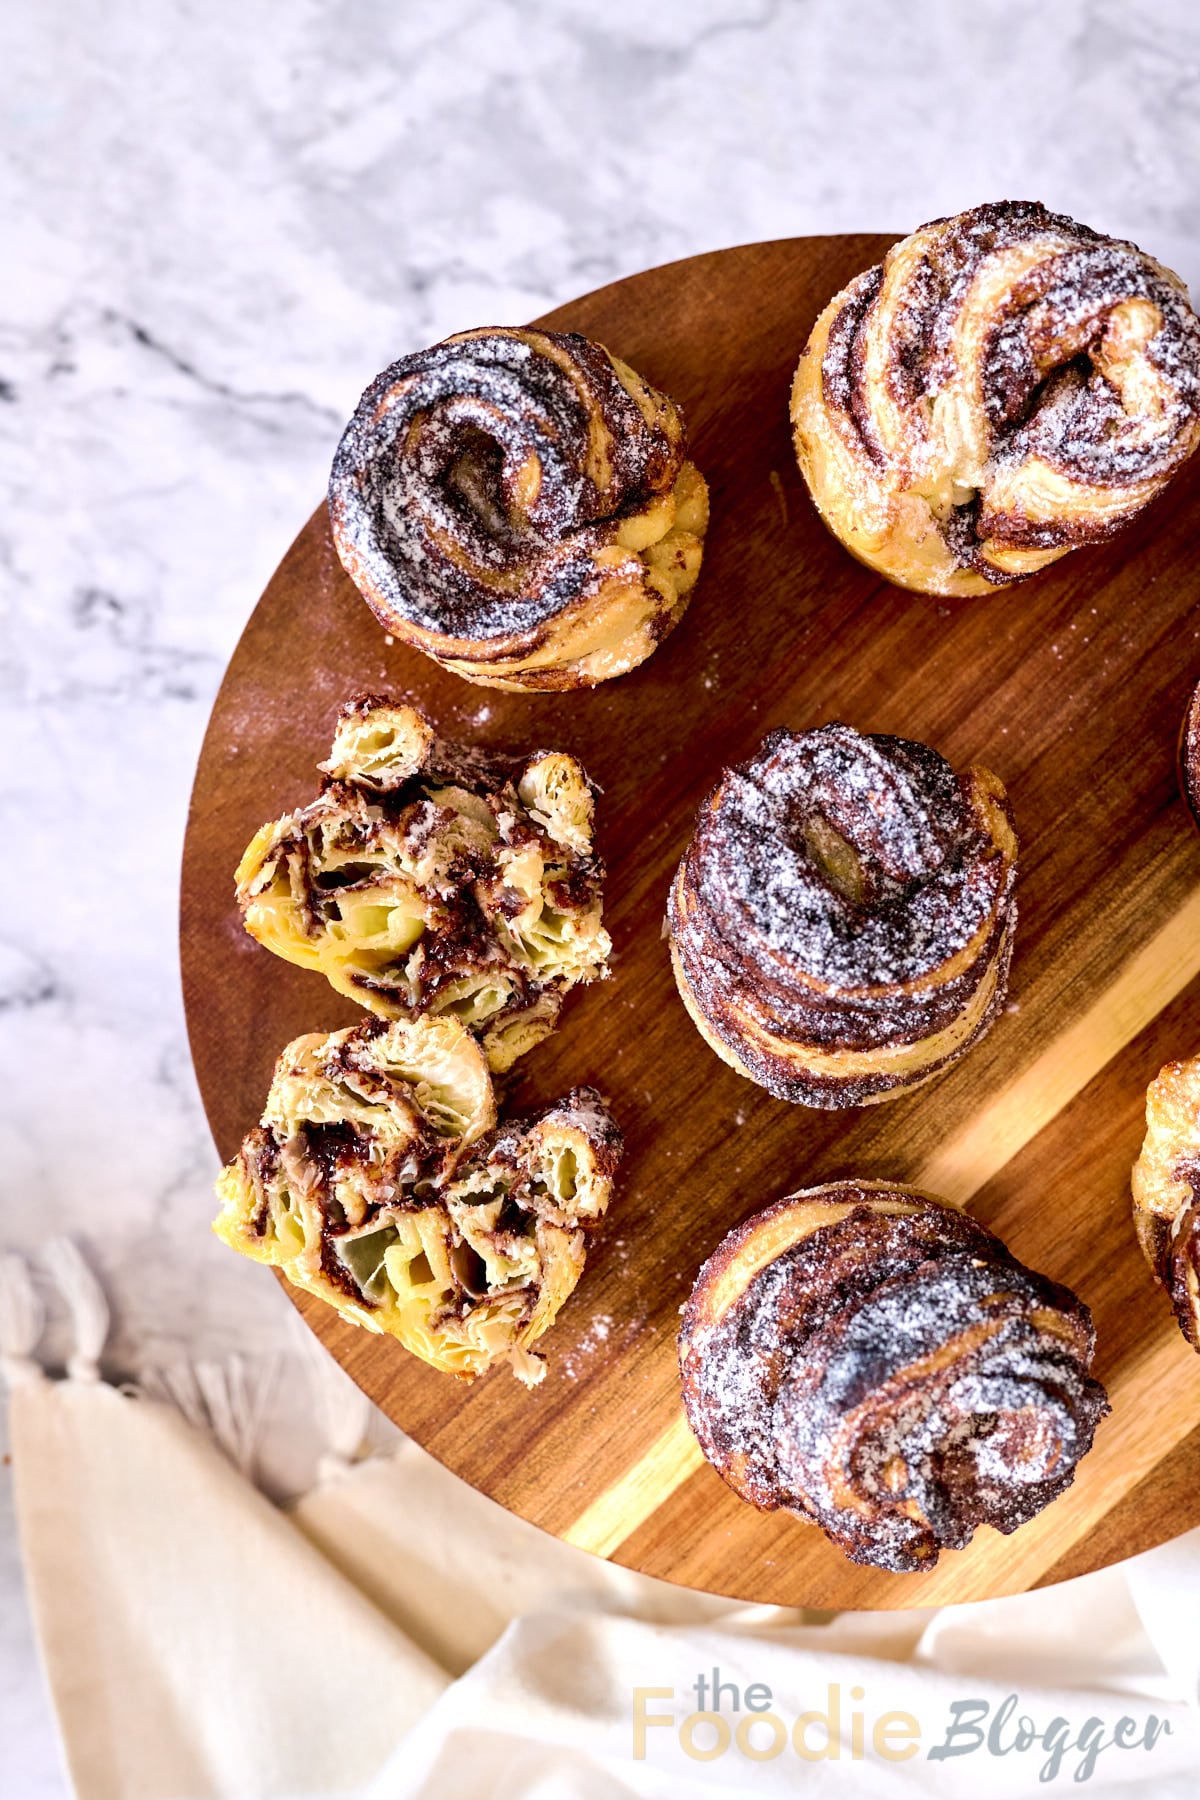 chocolate nutella cruffins on a wooden board view from top